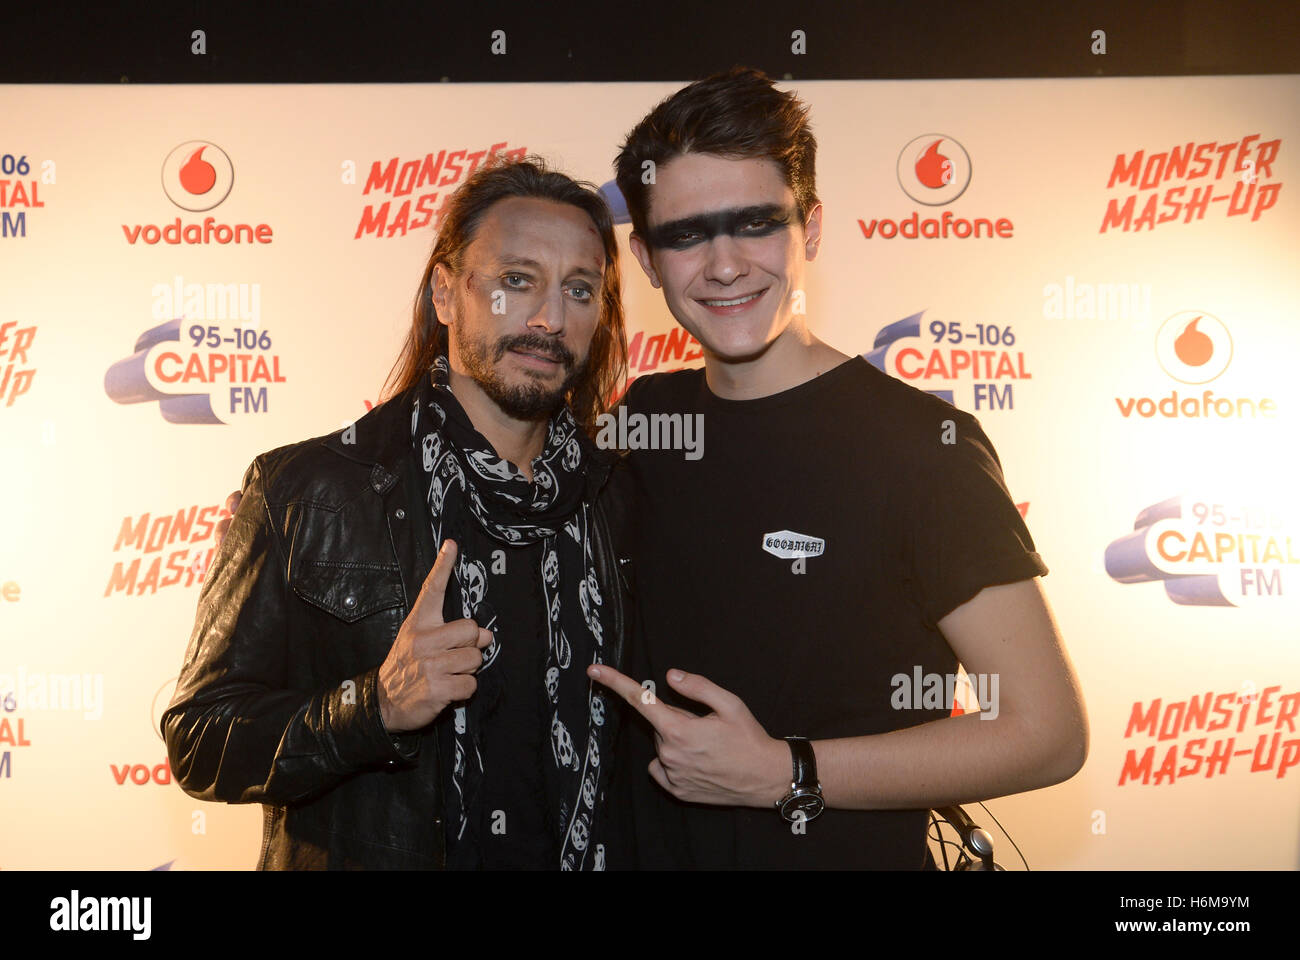 Bob Sinclar and Kungs backstage during Capital FM's Monster Mash Up with  Vodafone held at Manchester Academy at University of Manchester Students  Union, Manchester. Capital's Monster Mash-Up with Vodafone took place at